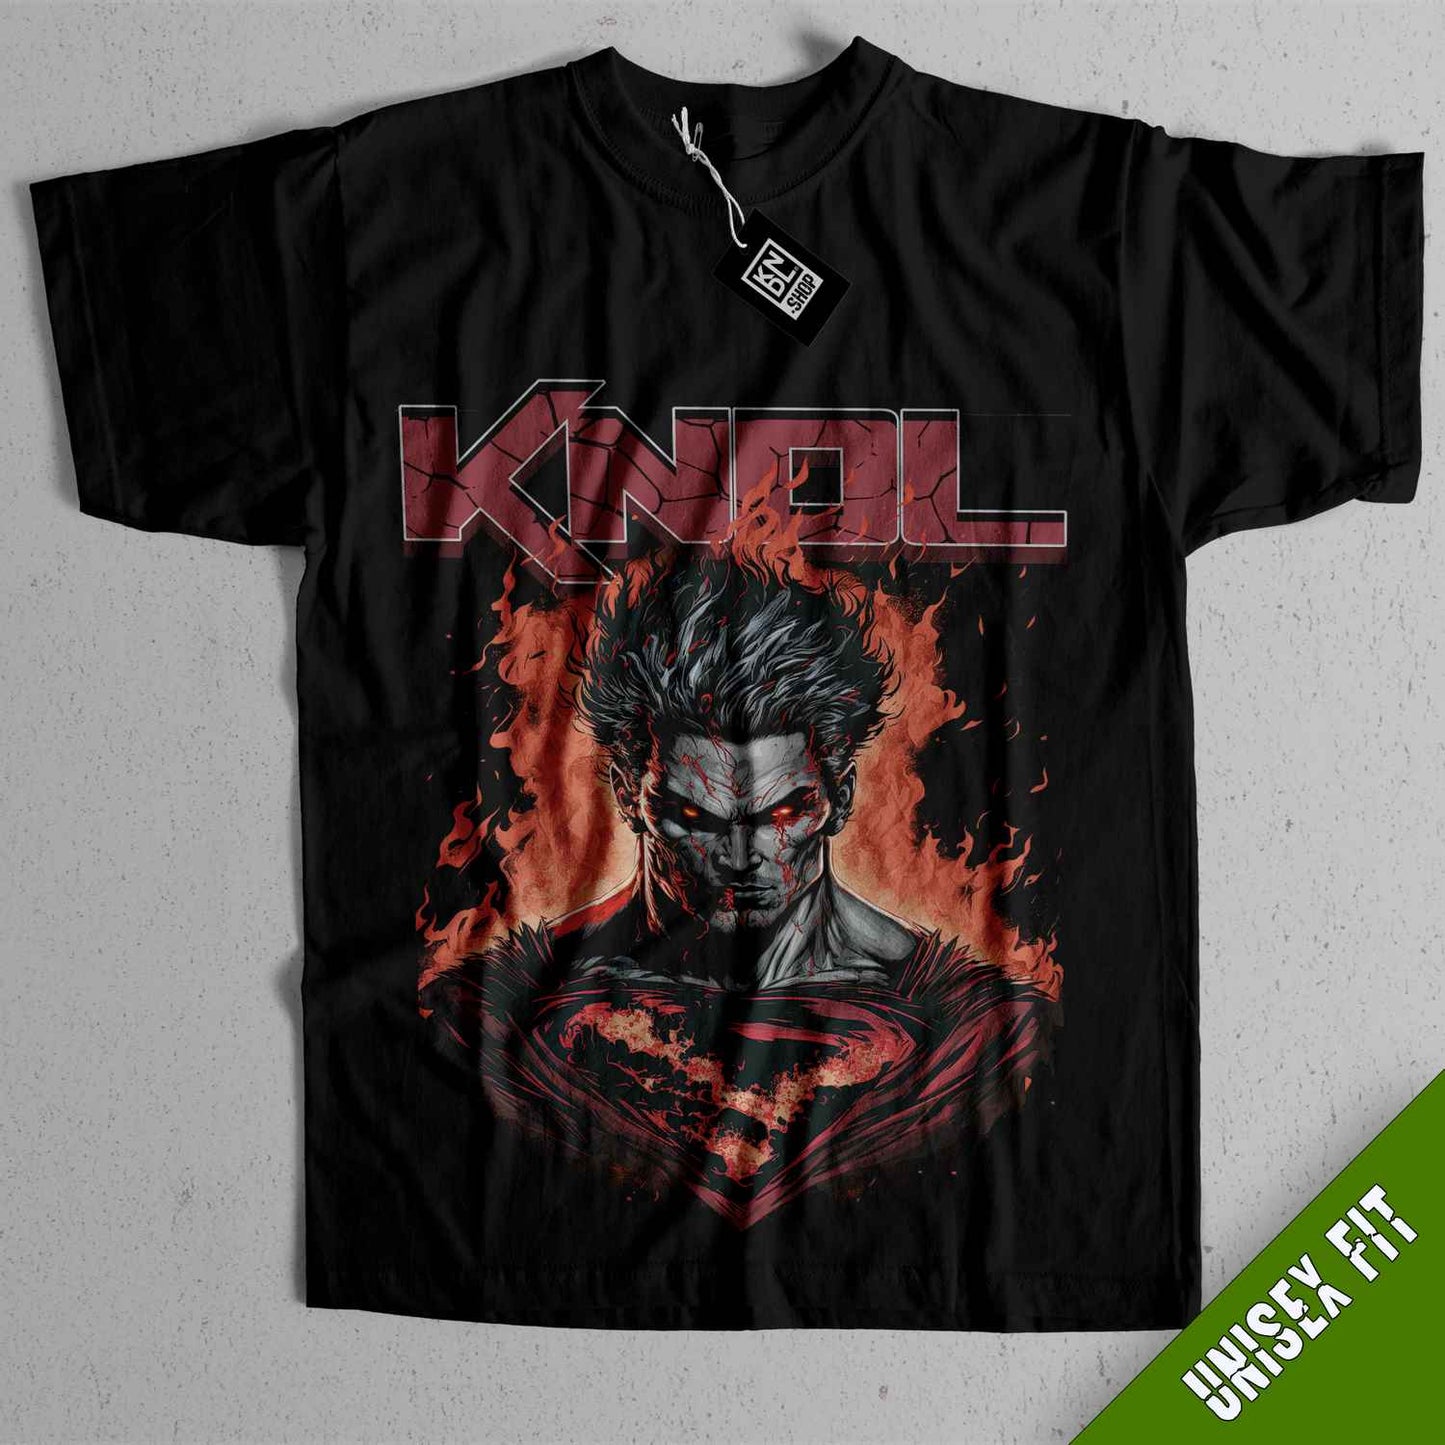 a black t - shirt with a picture of a man in flames